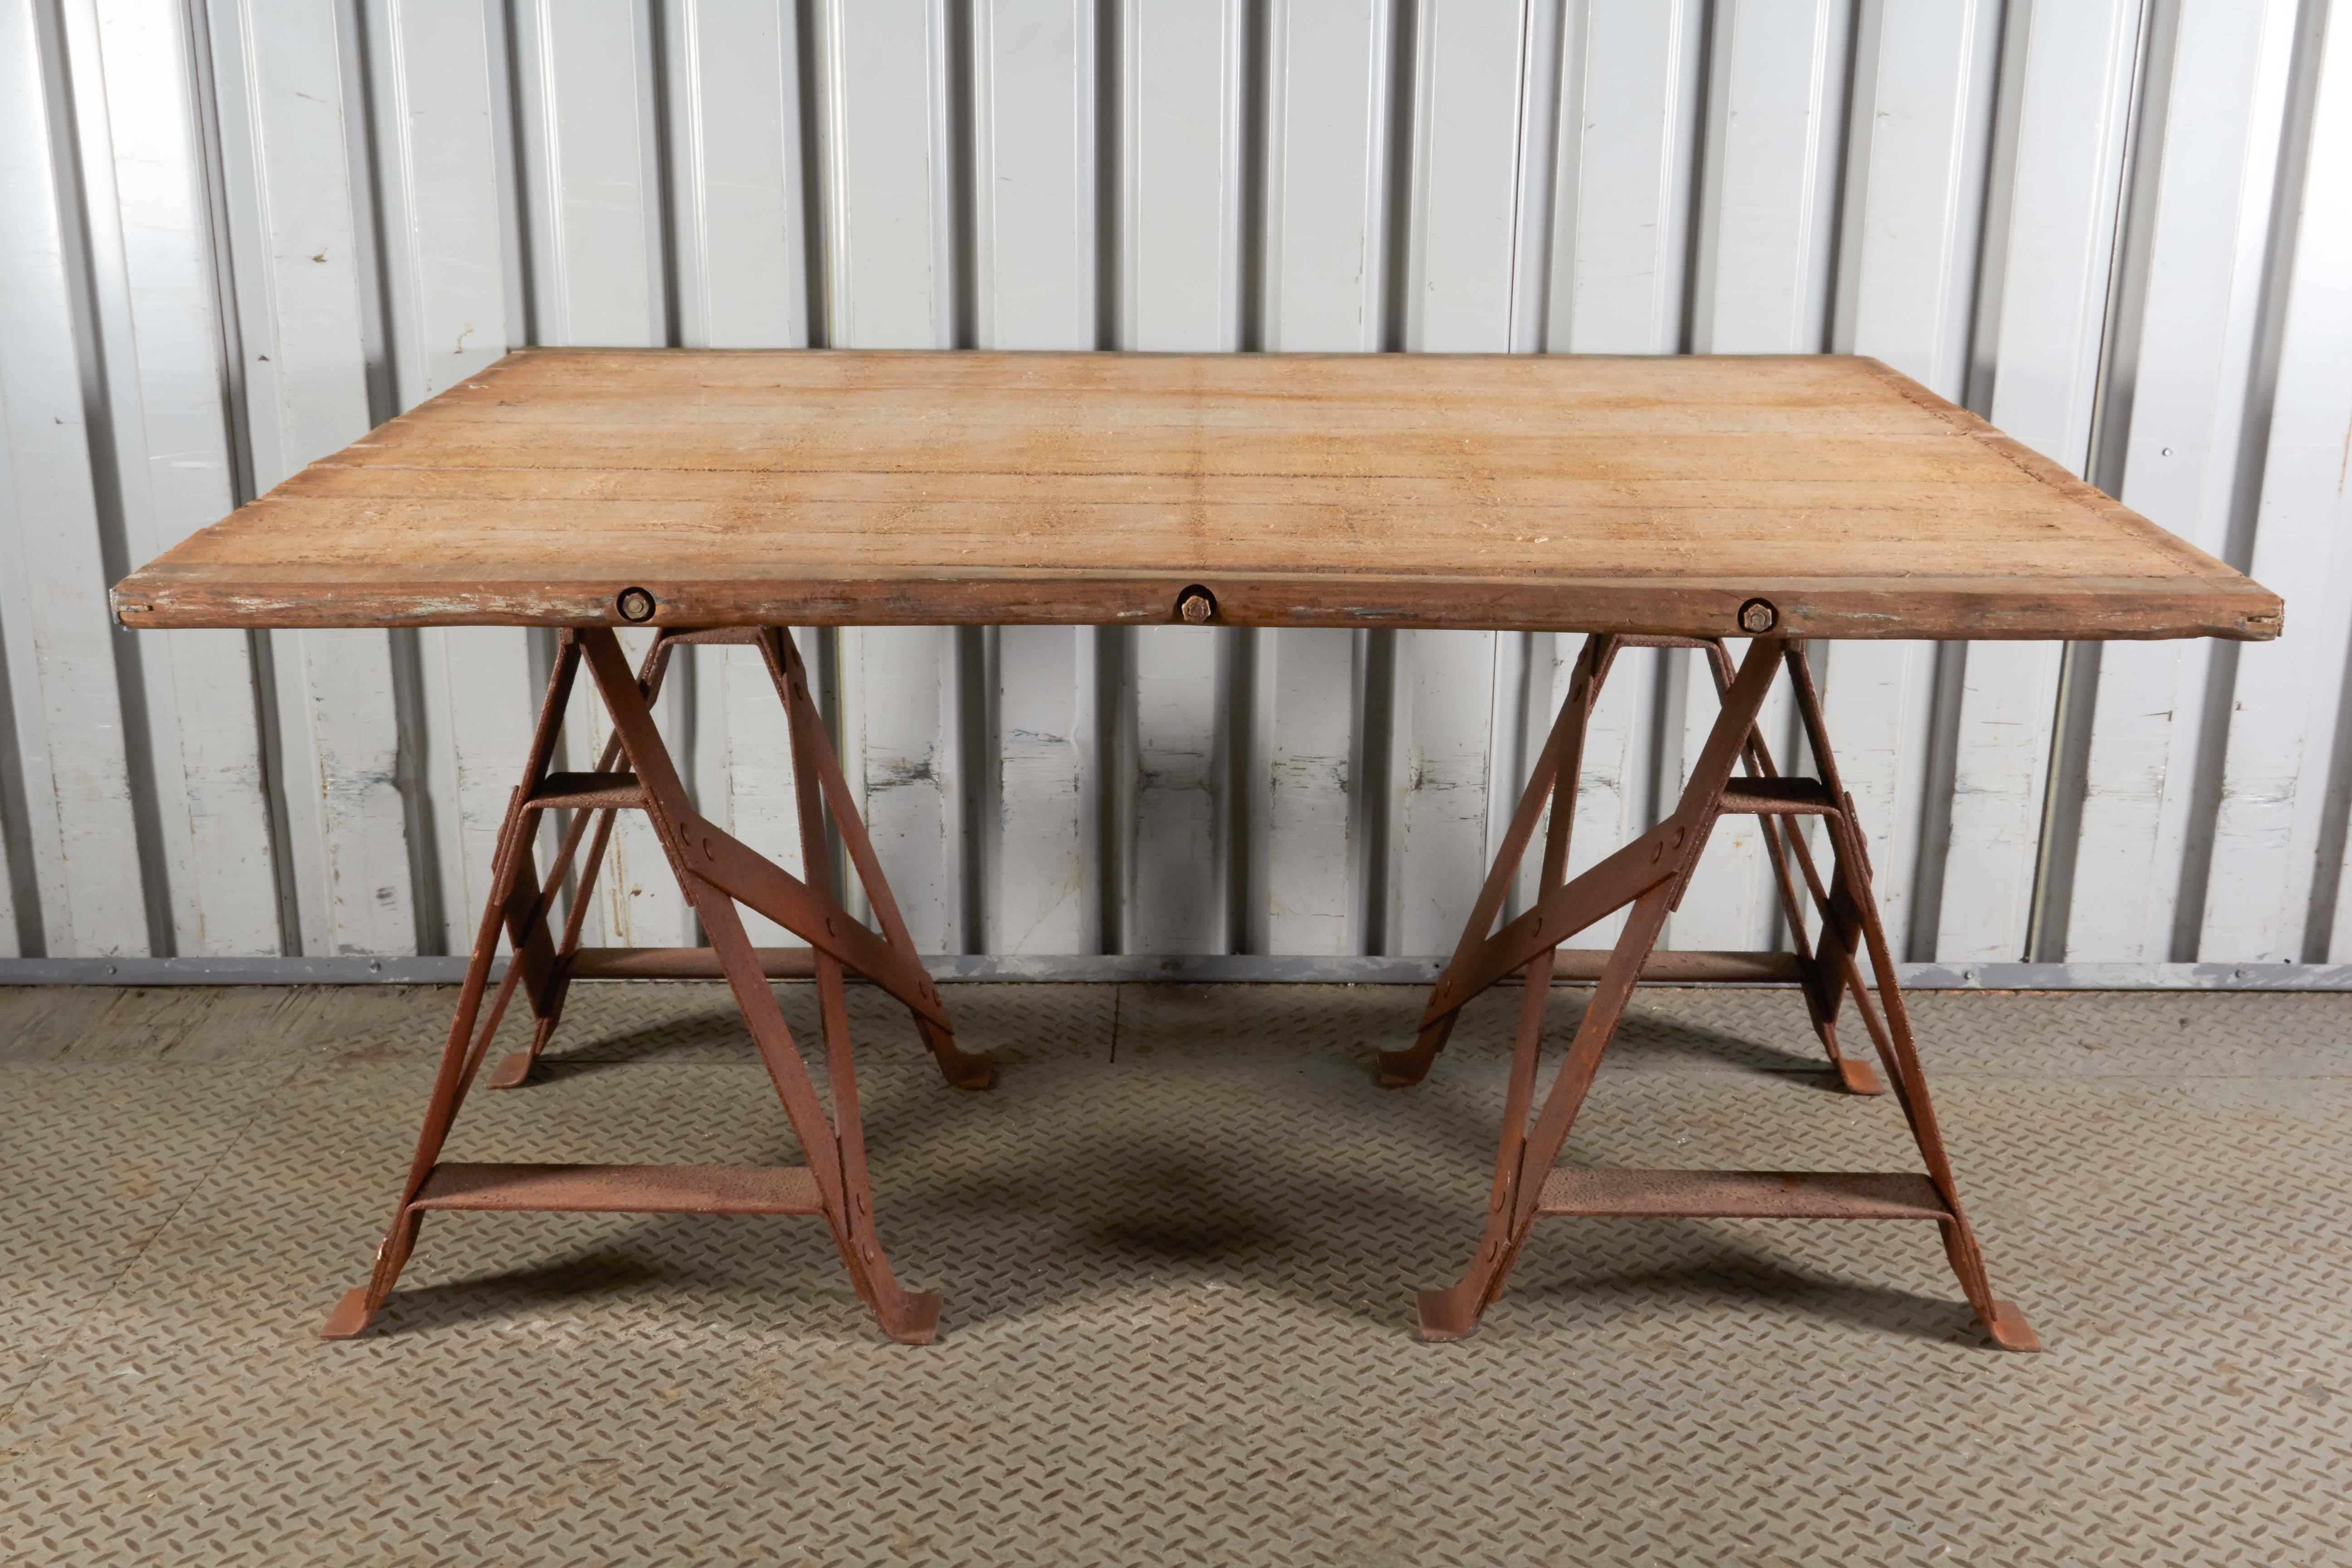 Industrial style trestle table consisting of rustic rough-hewn wood top and riveted iron bases.